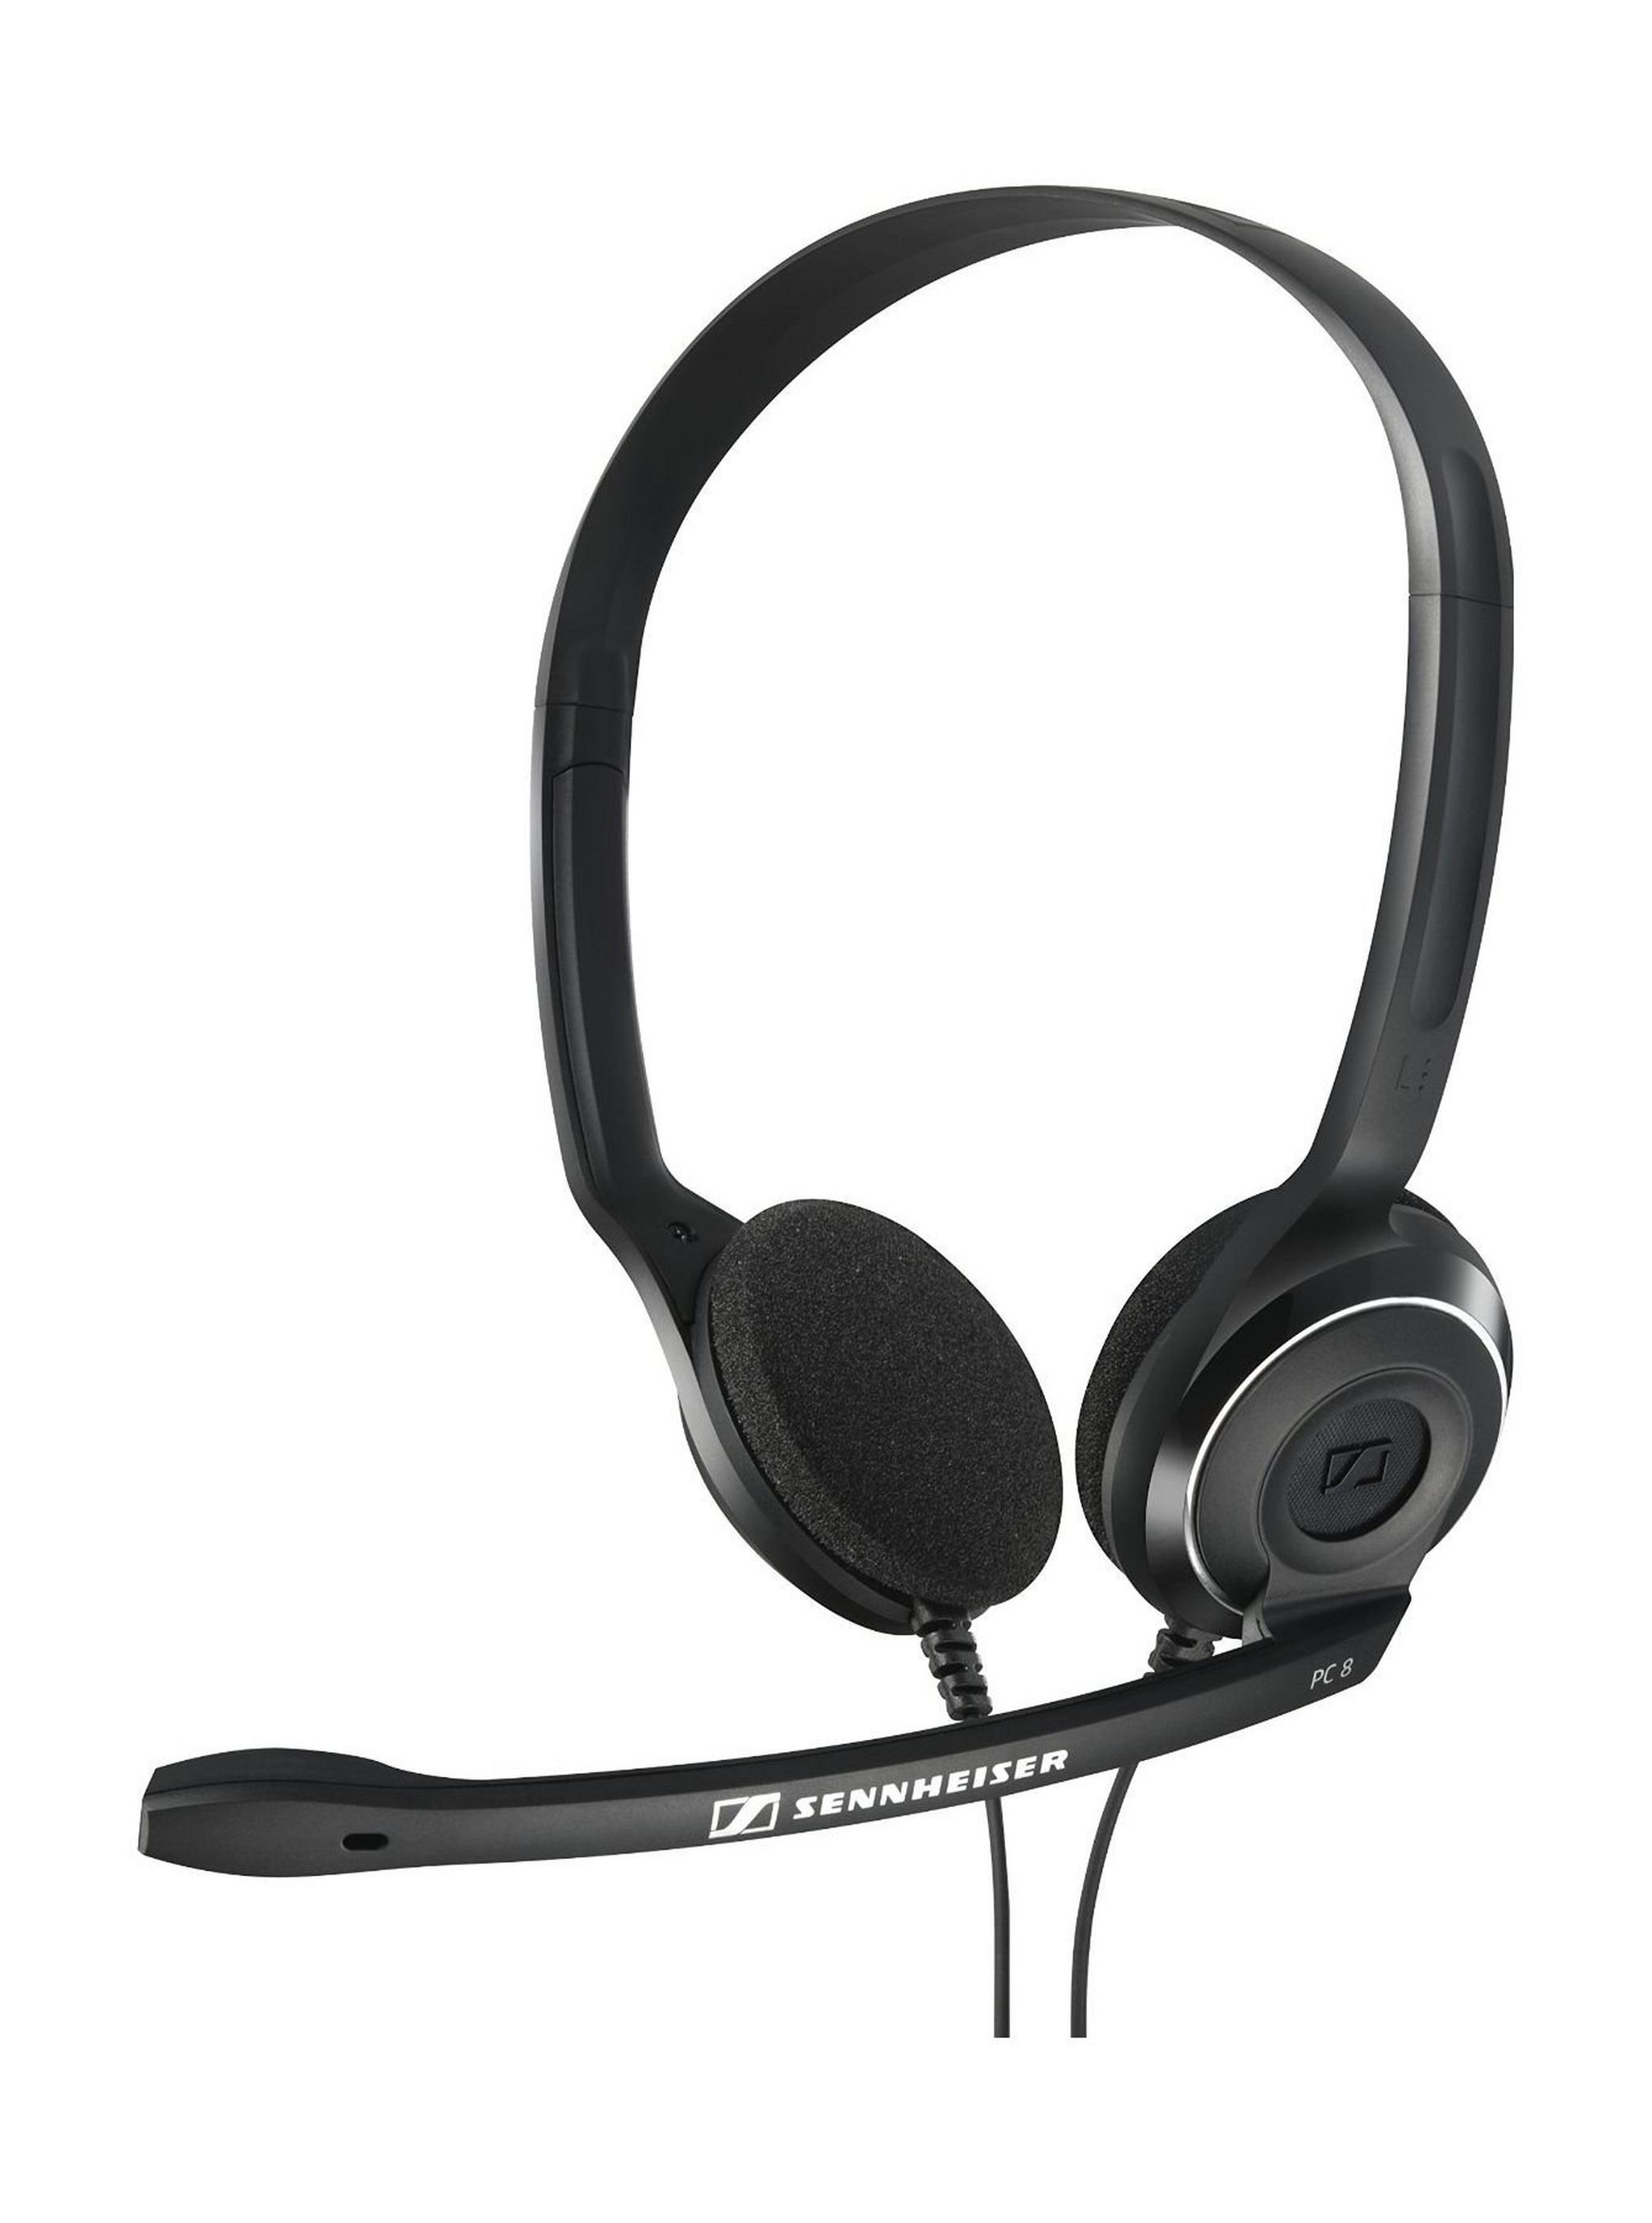 Sennheiser PC 8 USB Over-Head Wired Headset with Mic - Black